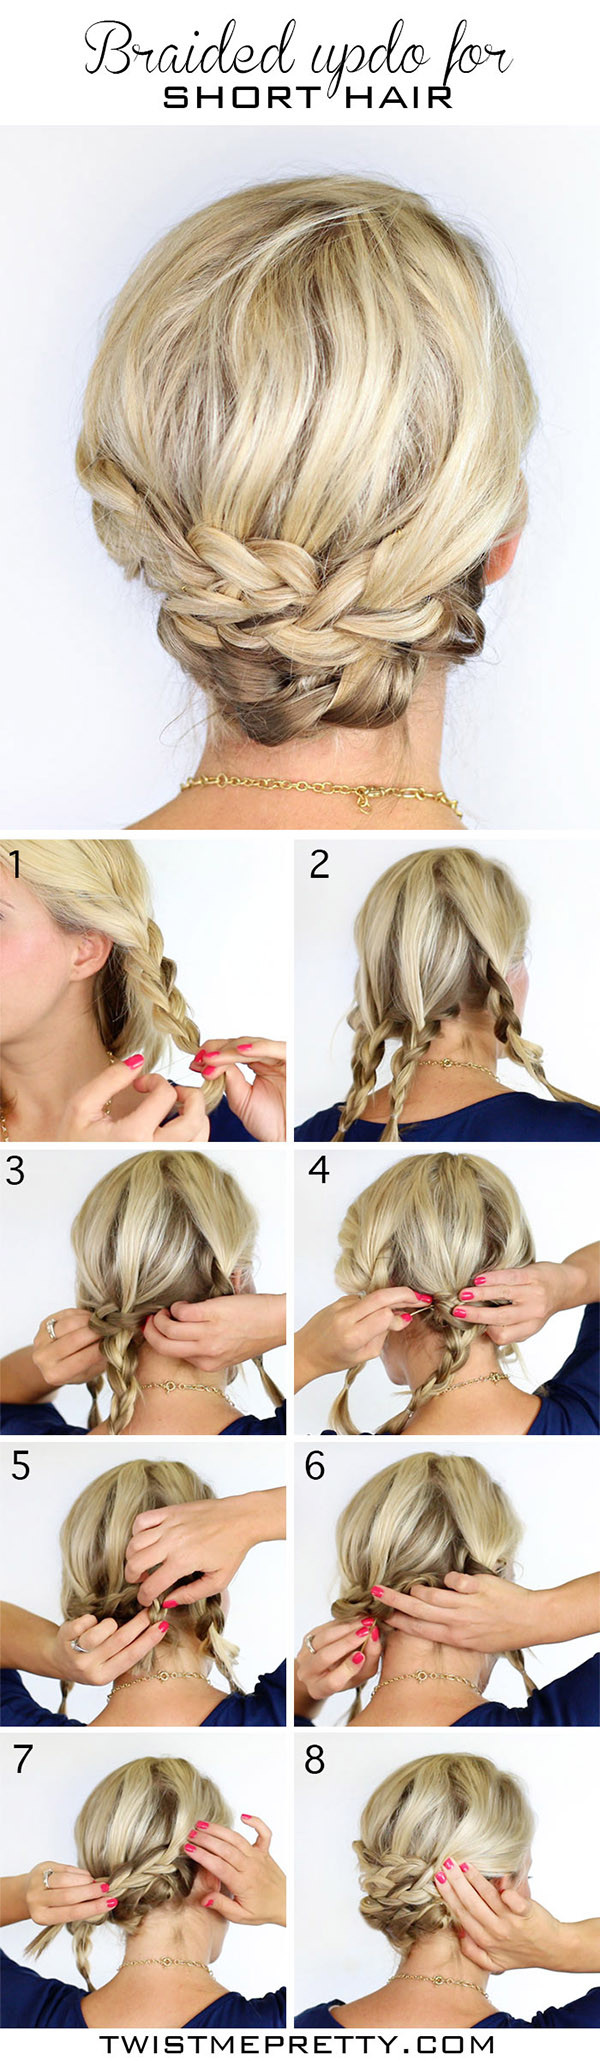 DIY Short Hairstyle
 20 DIY Wedding Hairstyles With Tutorials To Try Your Own